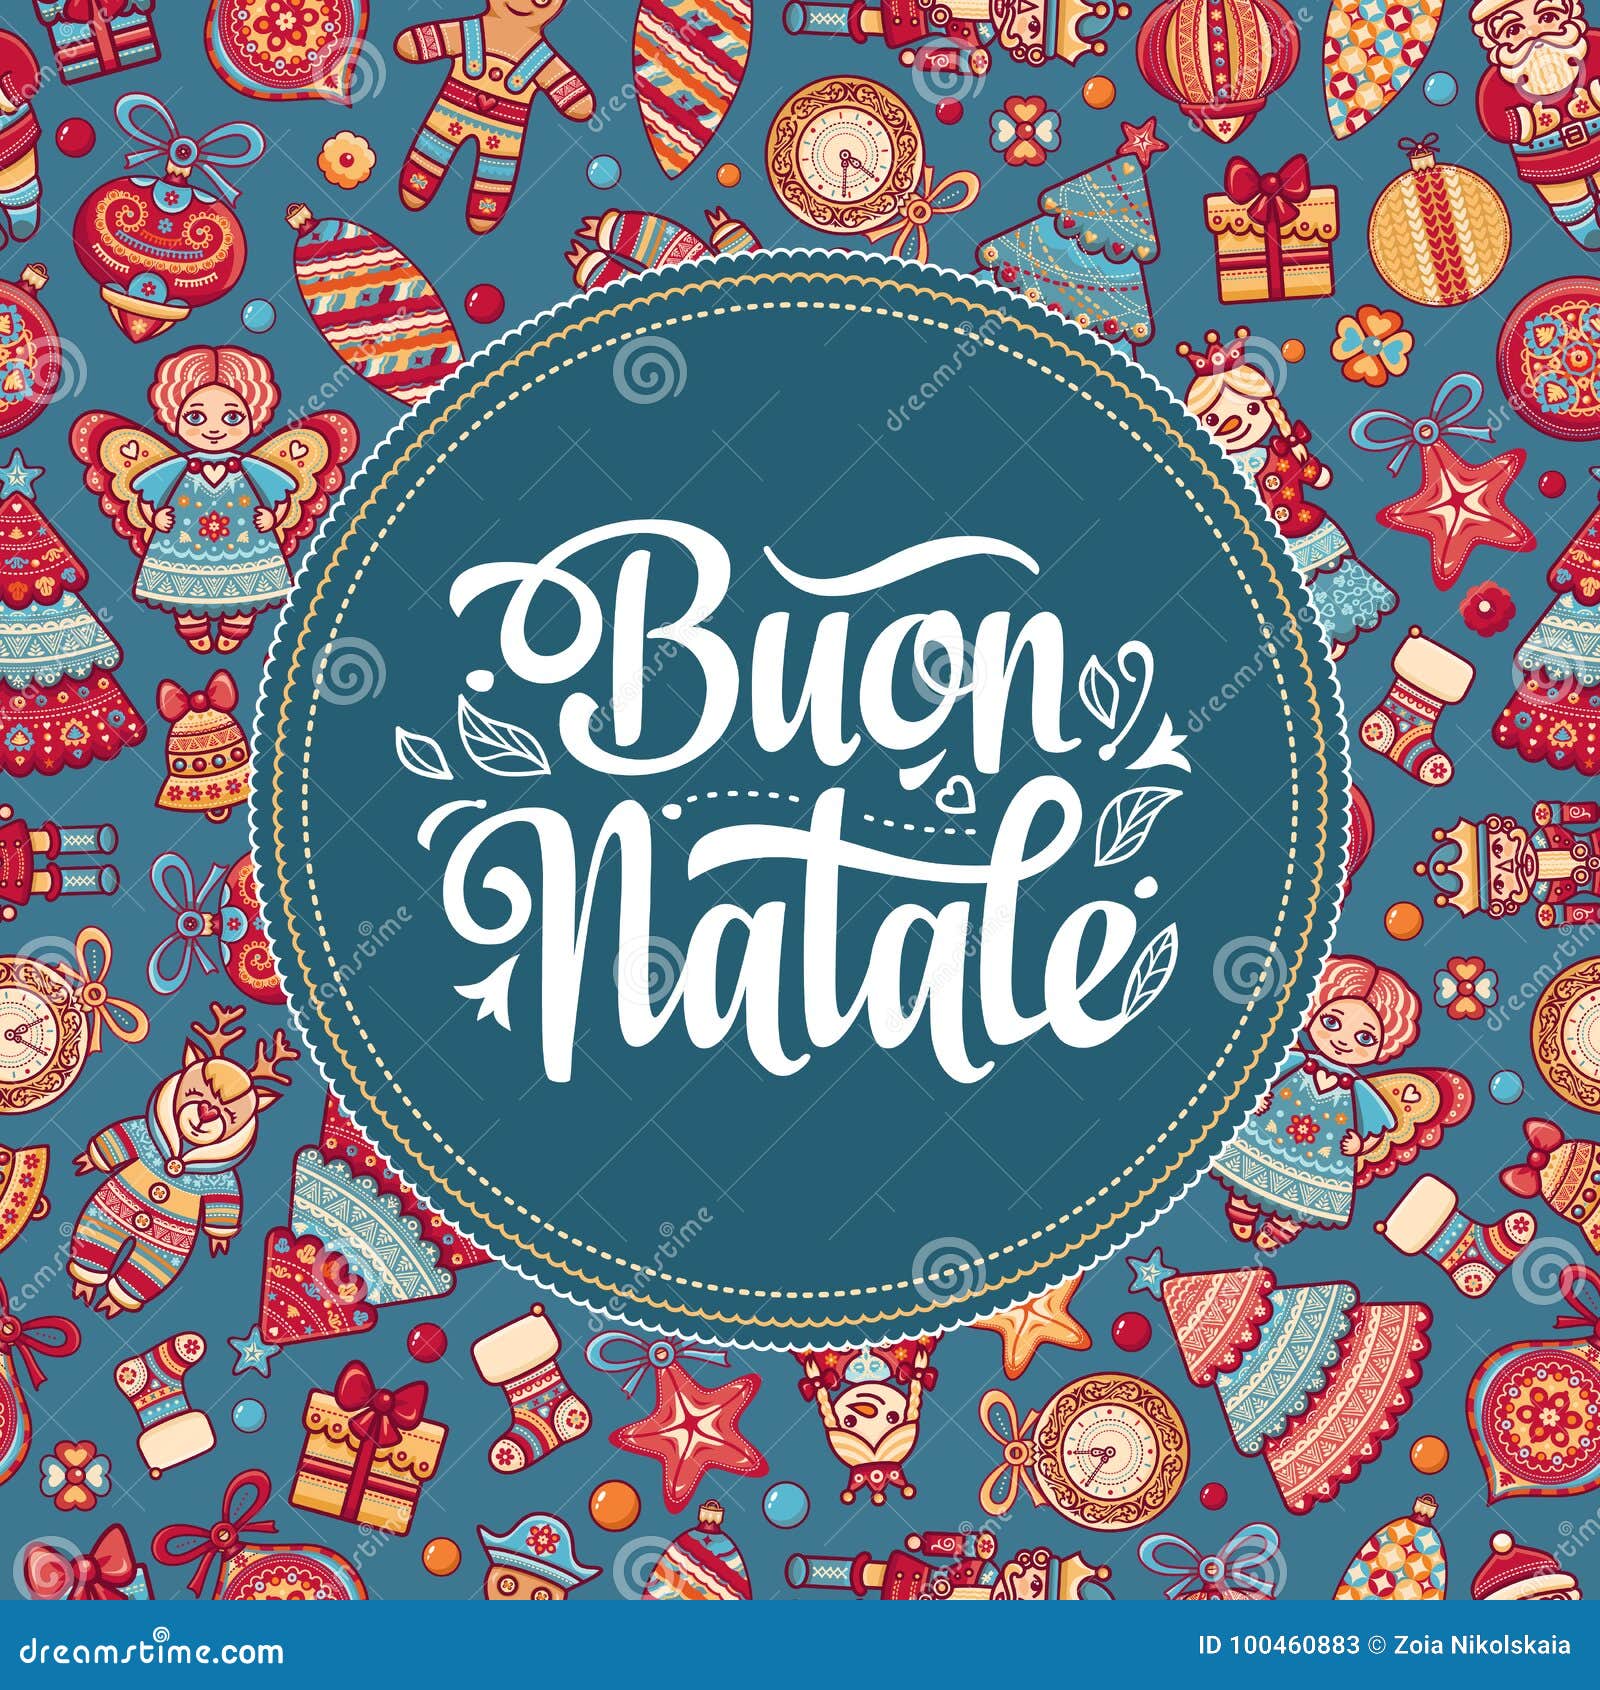 Immagini Natale Vintage.Buon Natale Greeting Card Christmas Template Winter Holiday In Italy Congratulation On Italian Vintage Style Stock Illustration Illustration Of Holiday Natale 100460883